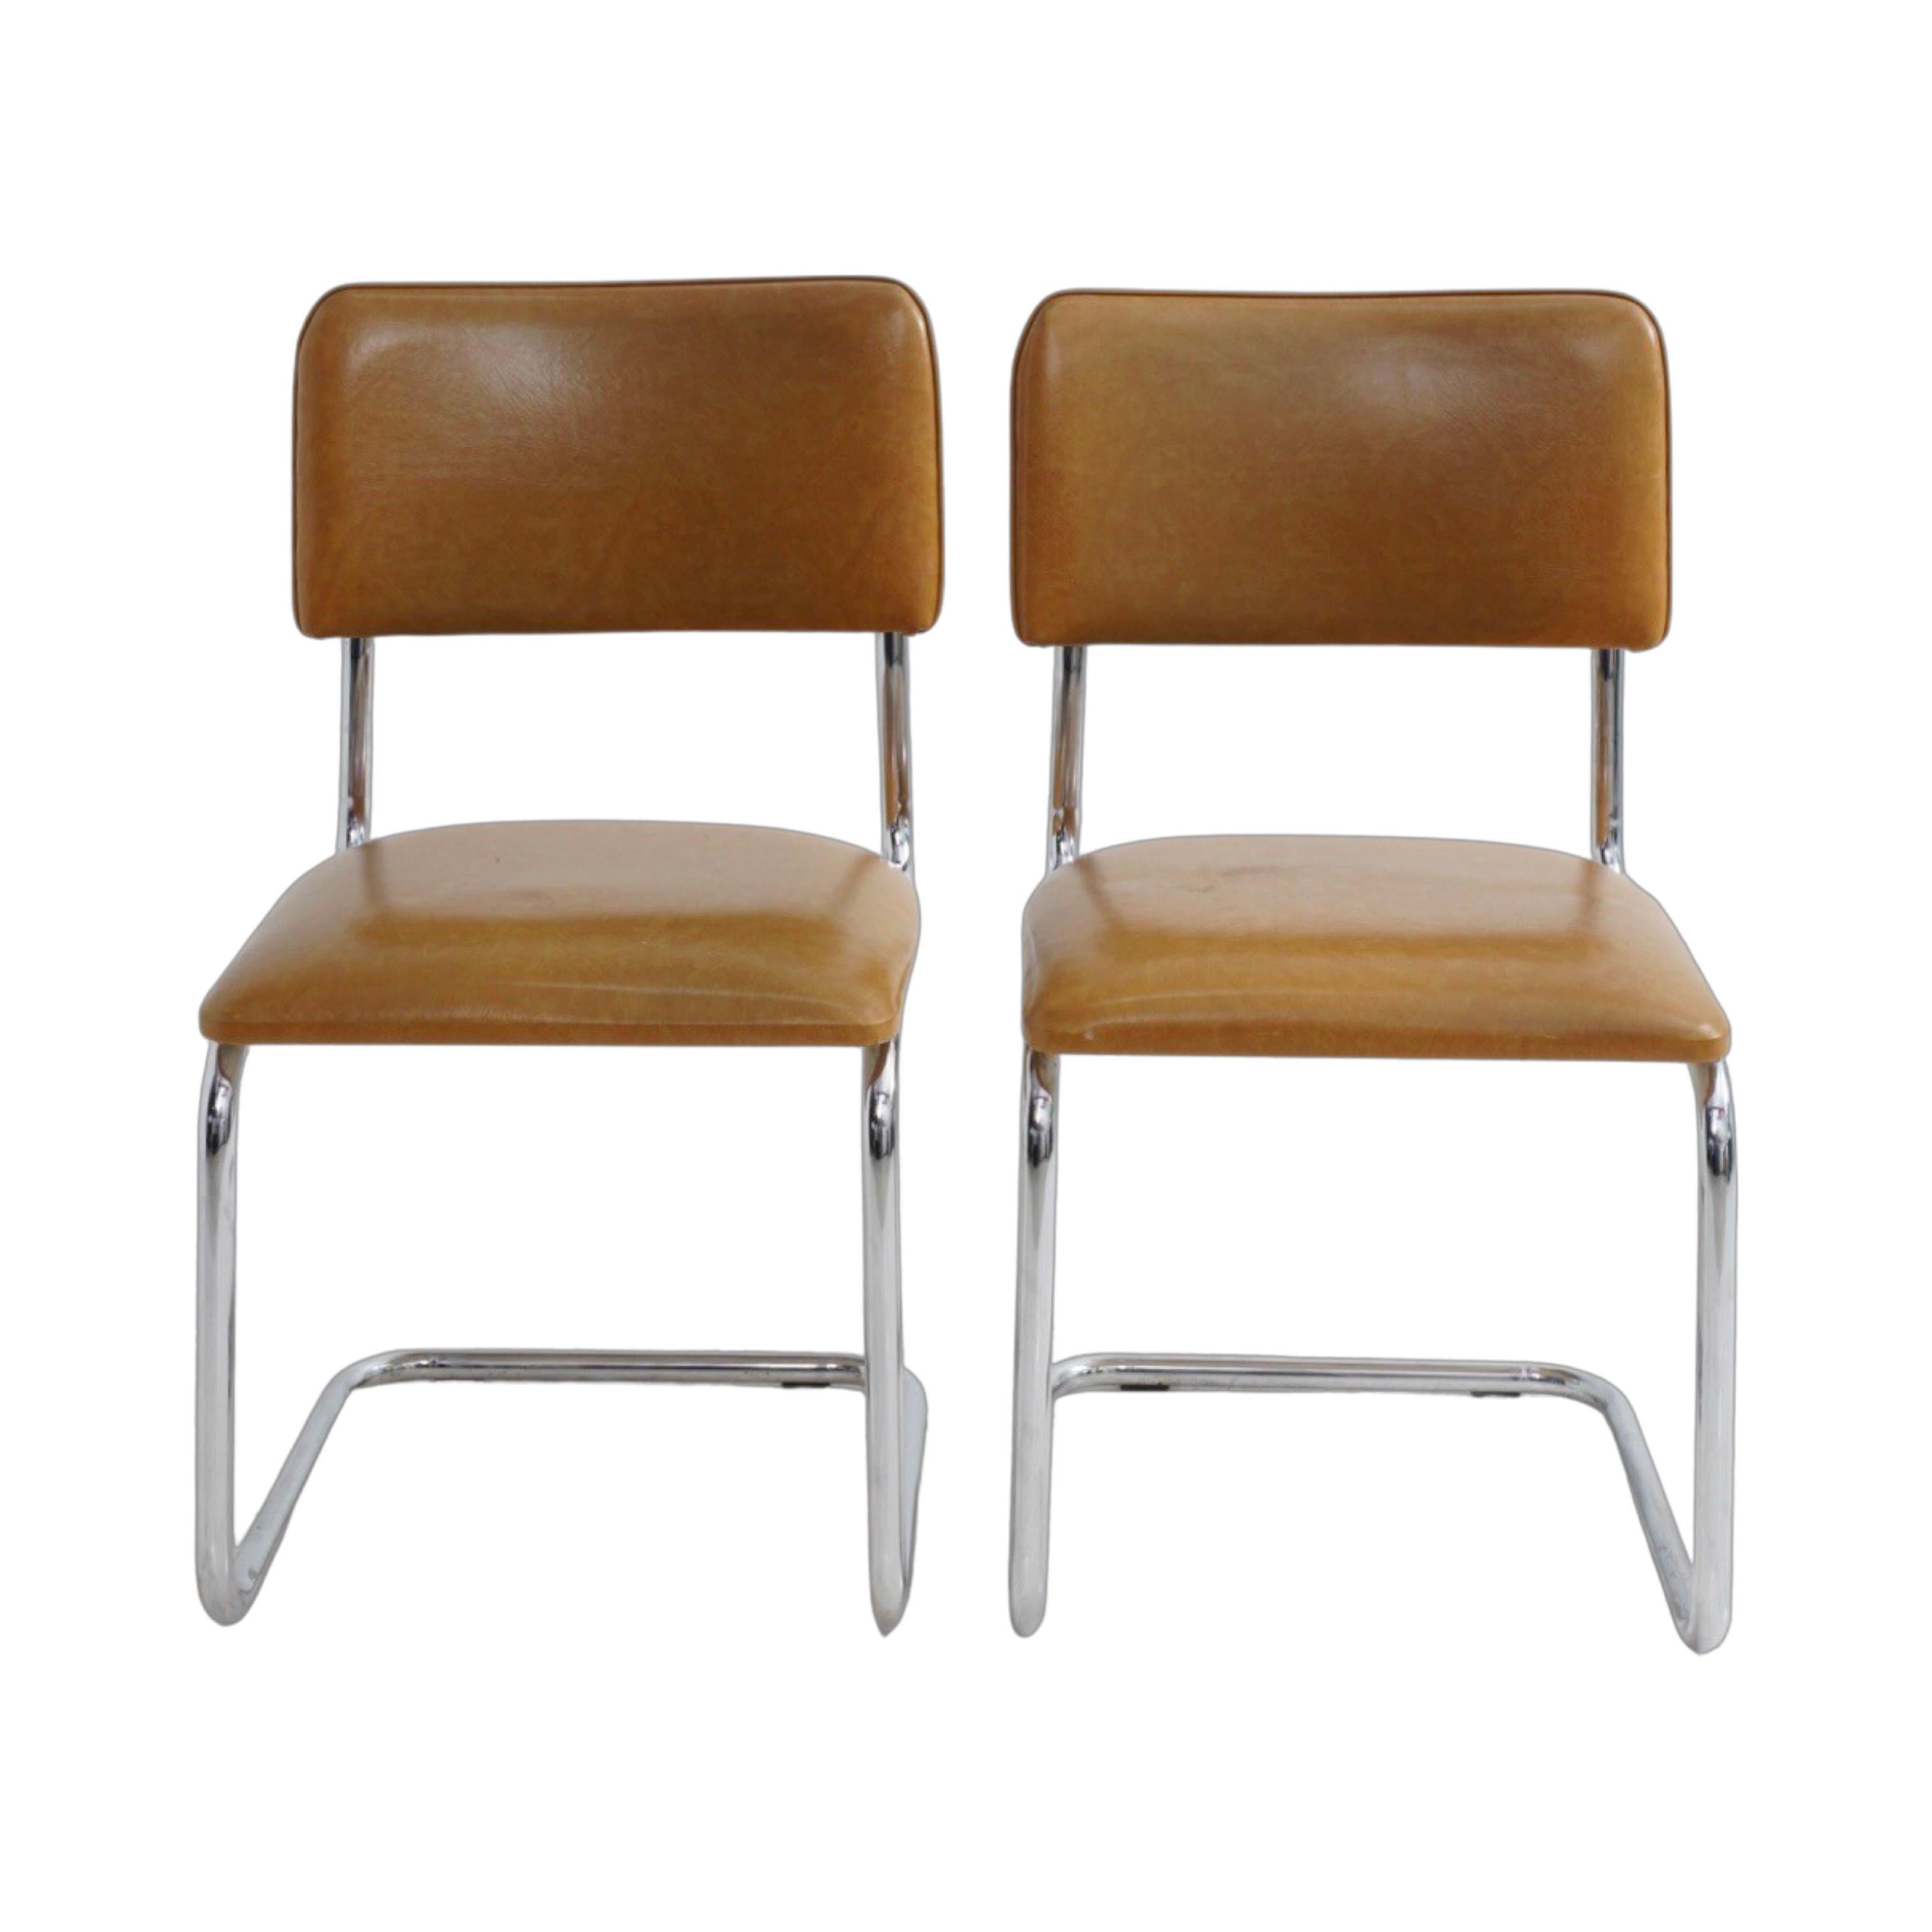 Faux Leather Pair of Chrome & Vinyl Cantilever Chairs, 1970s